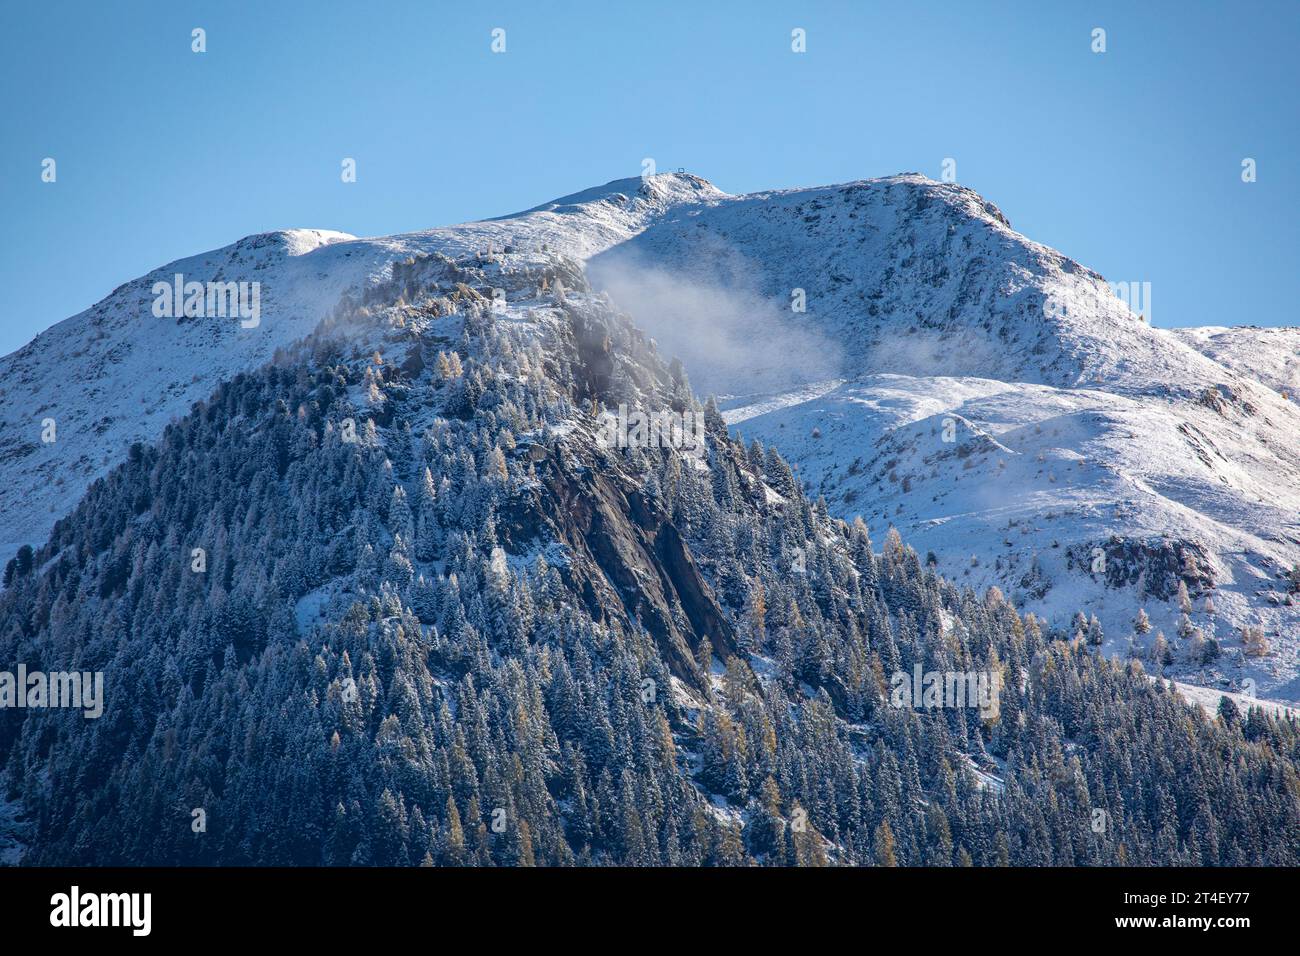 First snow on the top of the mountains near Davos, Switzerland Stock Photo